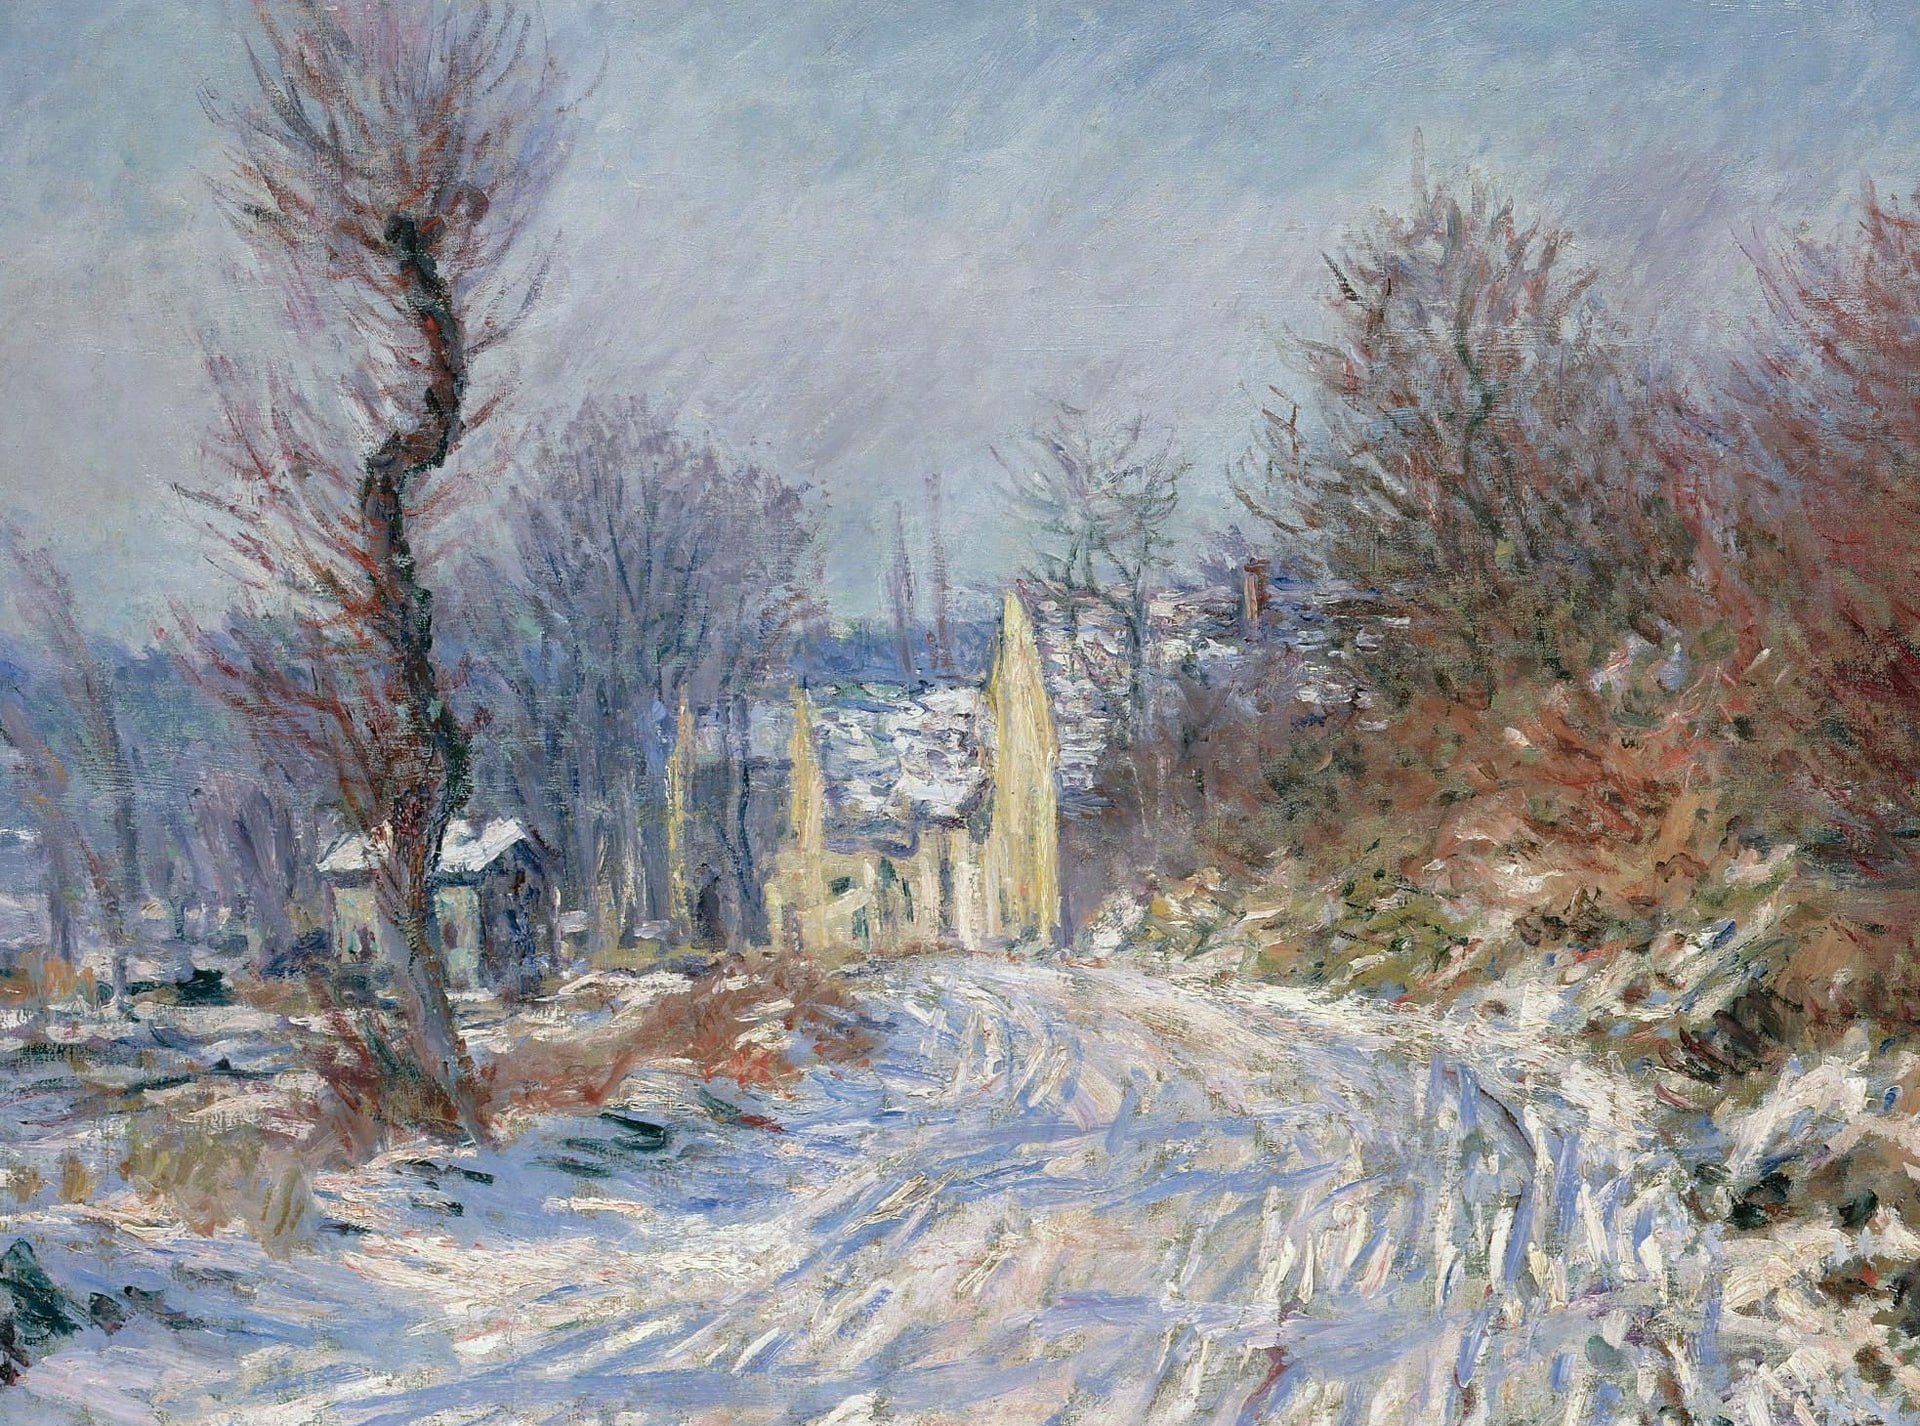 snow, landscape, house, tree, picture, Claude Monet, Road to Giverny in Winter